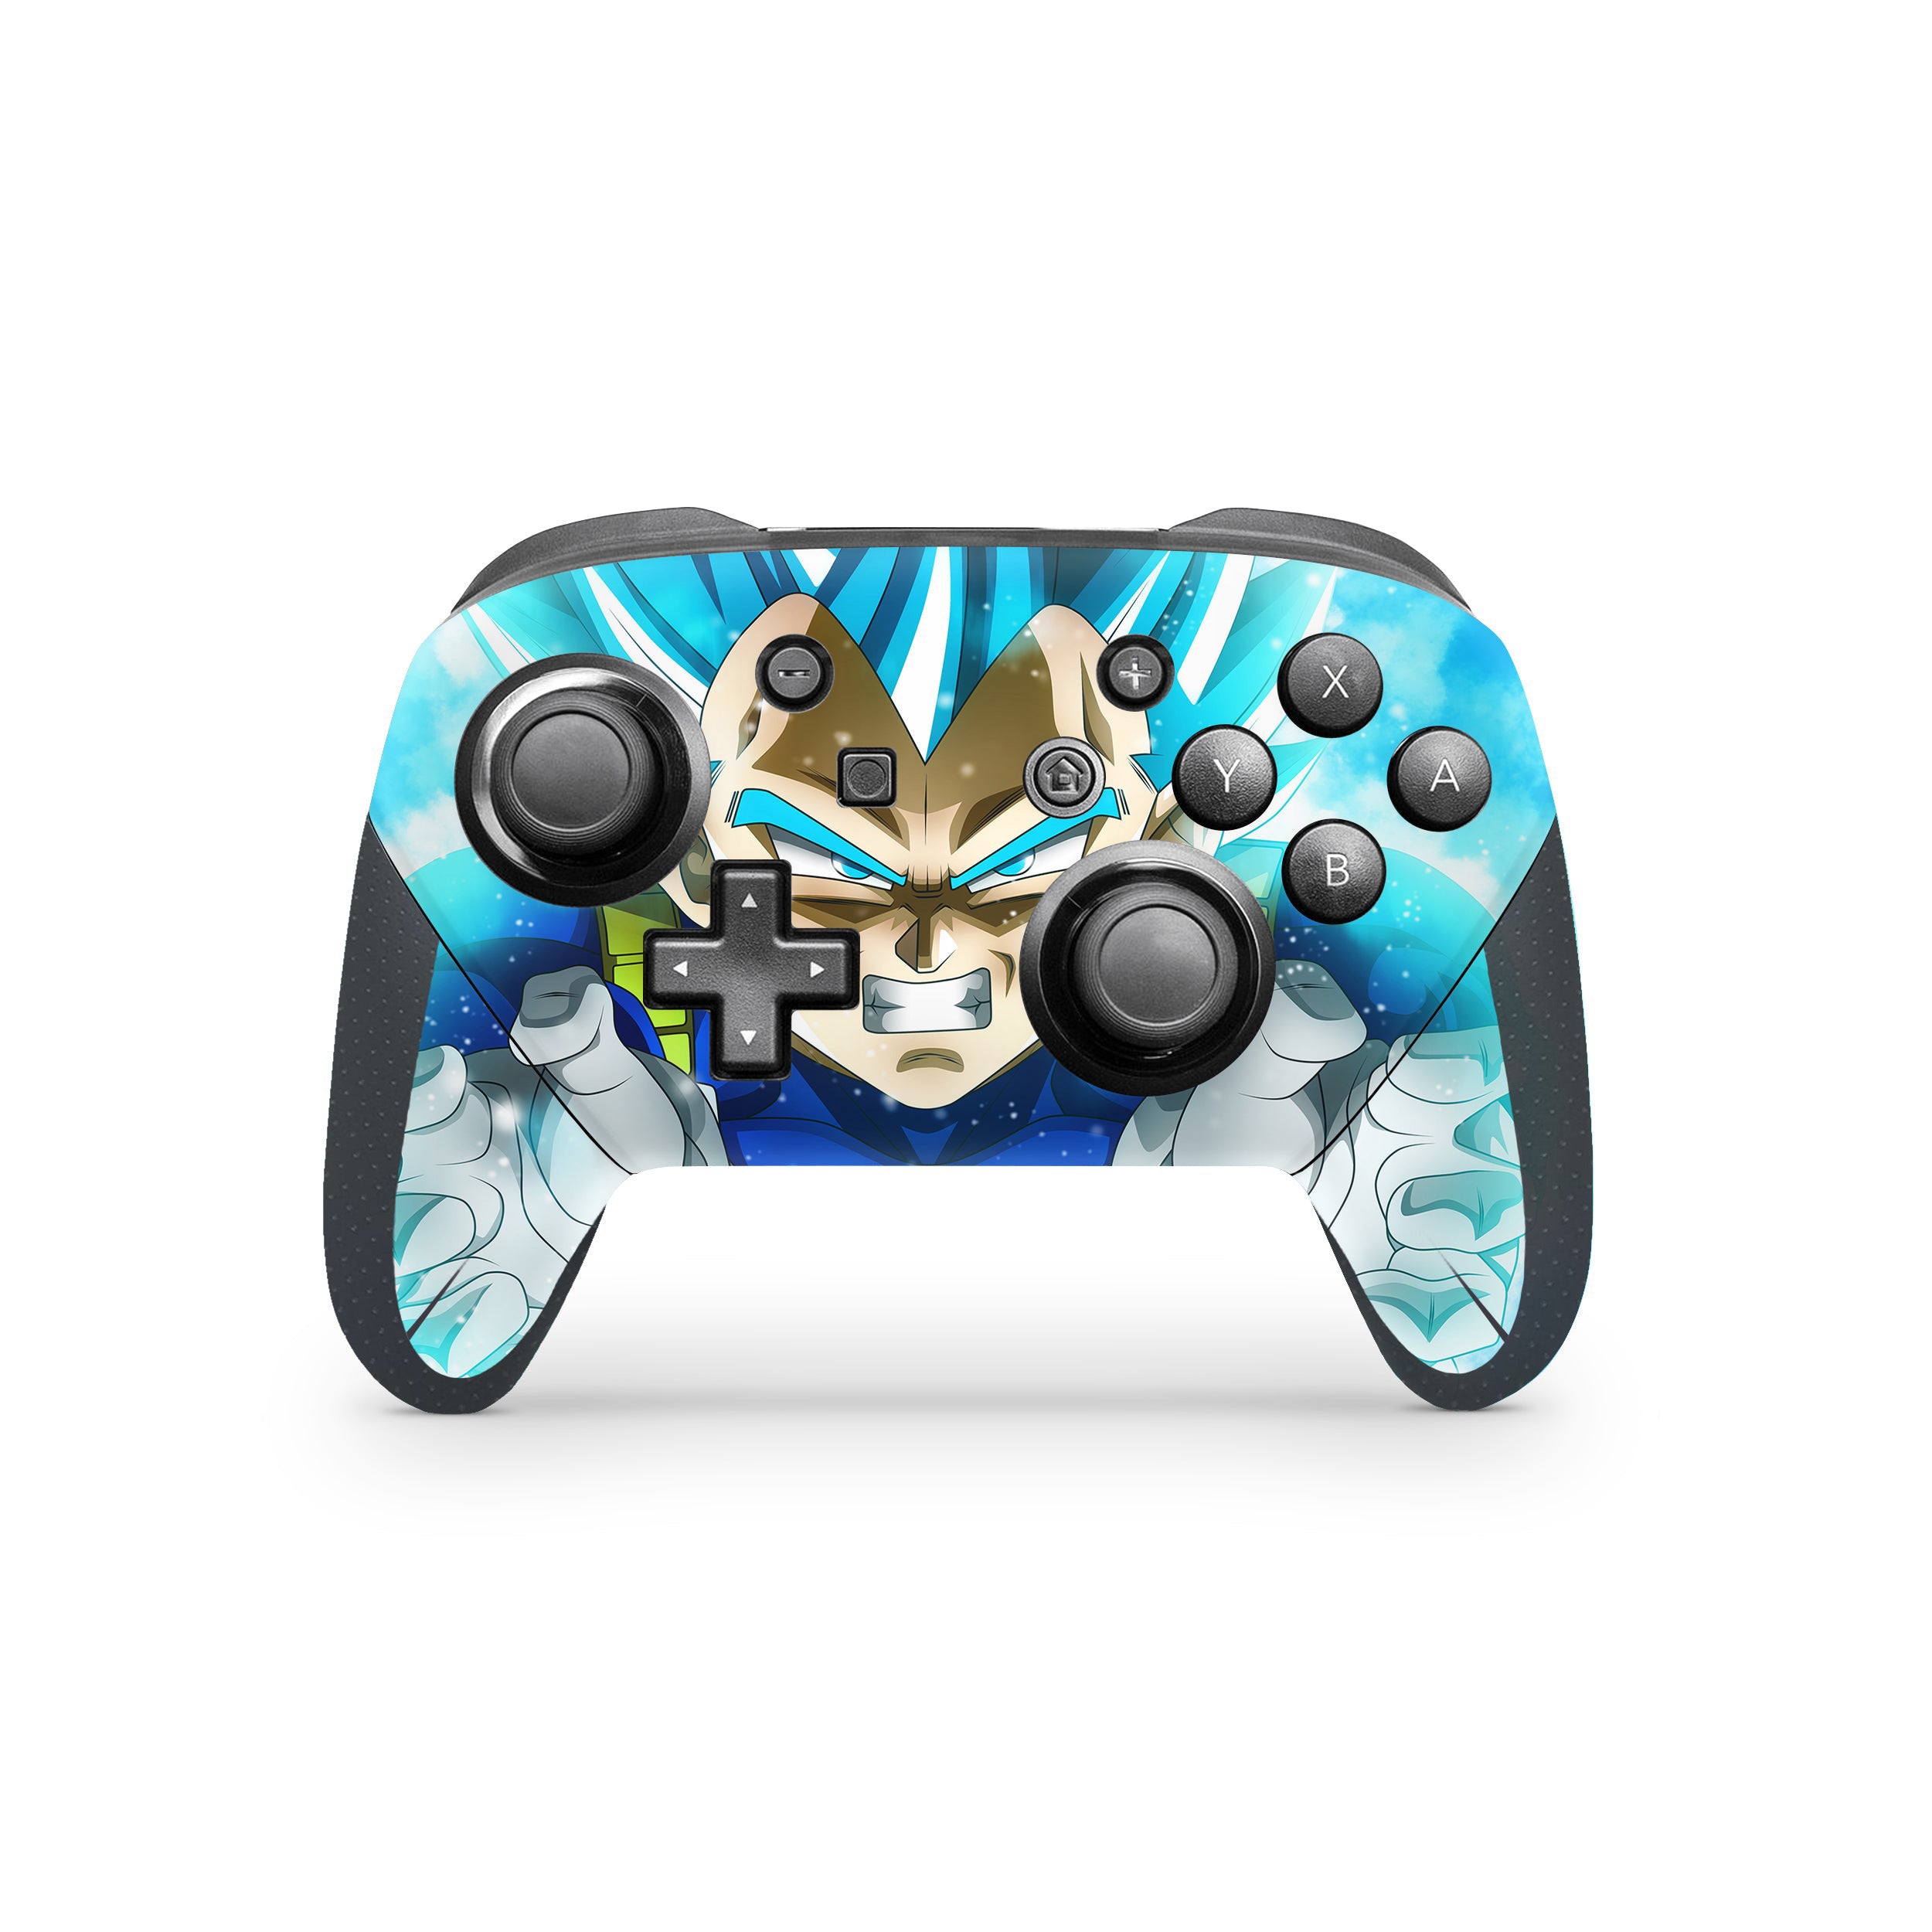 A video game skin featuring a Dragon Ball Super Vegeta design for the Switch Pro Controller.